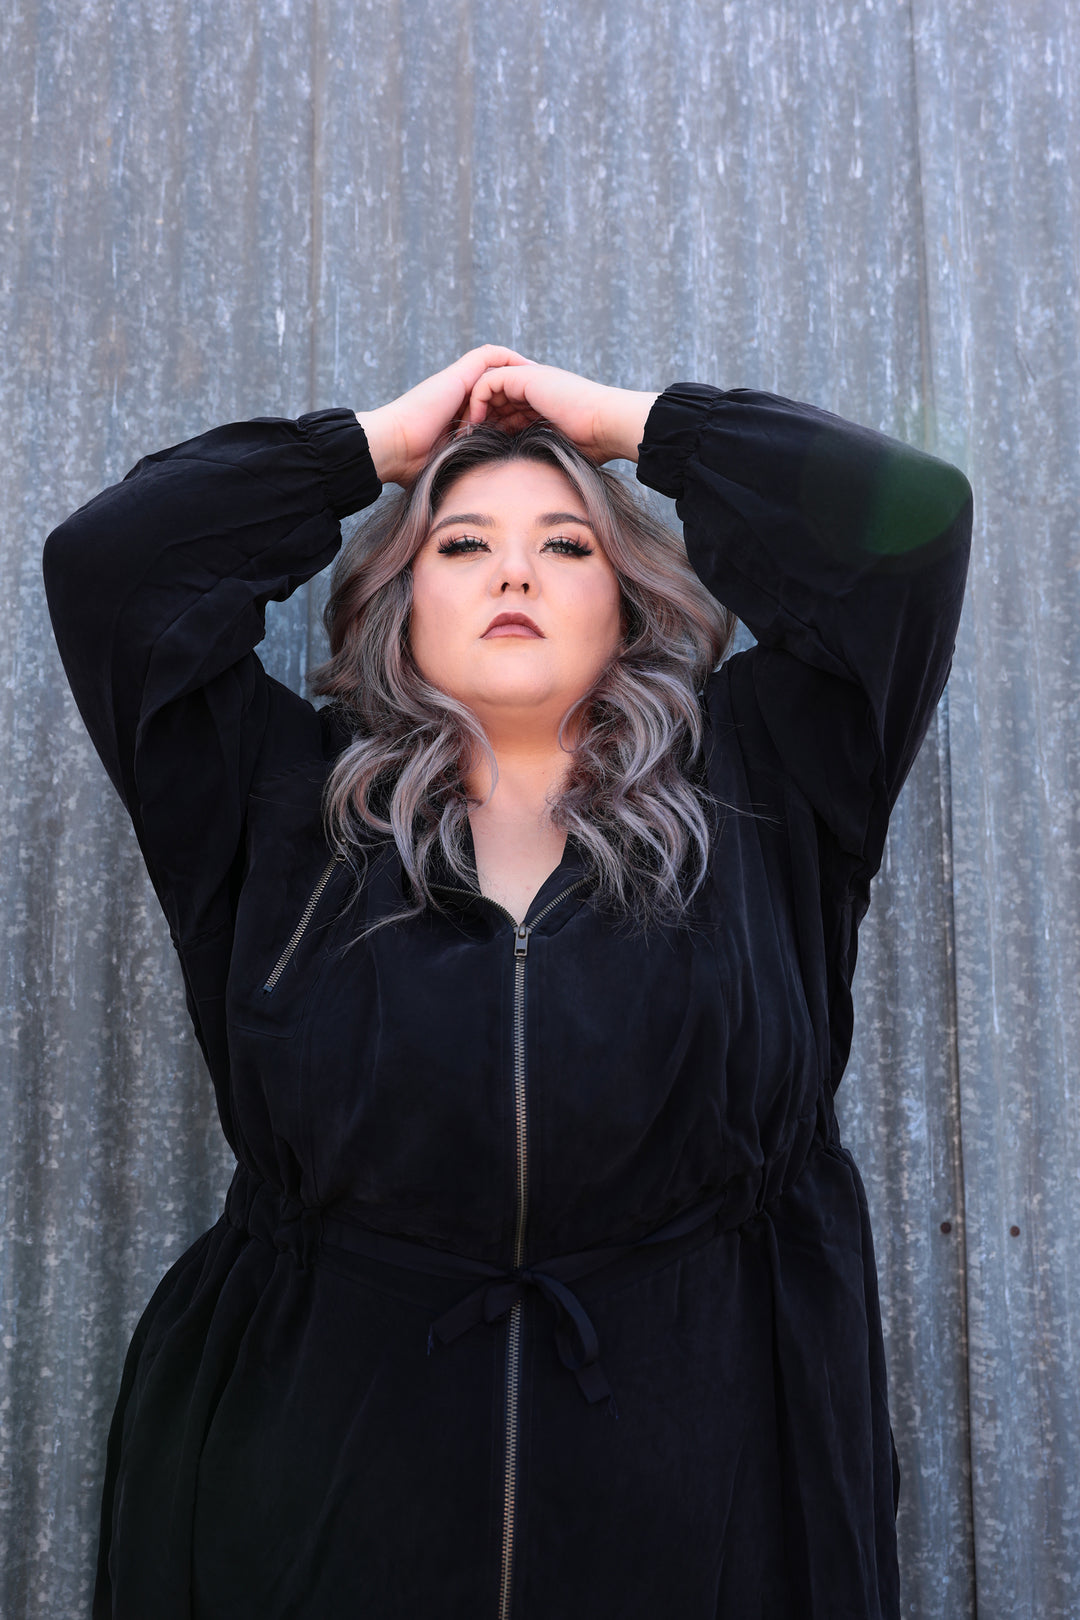 Plus Size Concert Outfit Inspiration & Ideas – Love Marlow